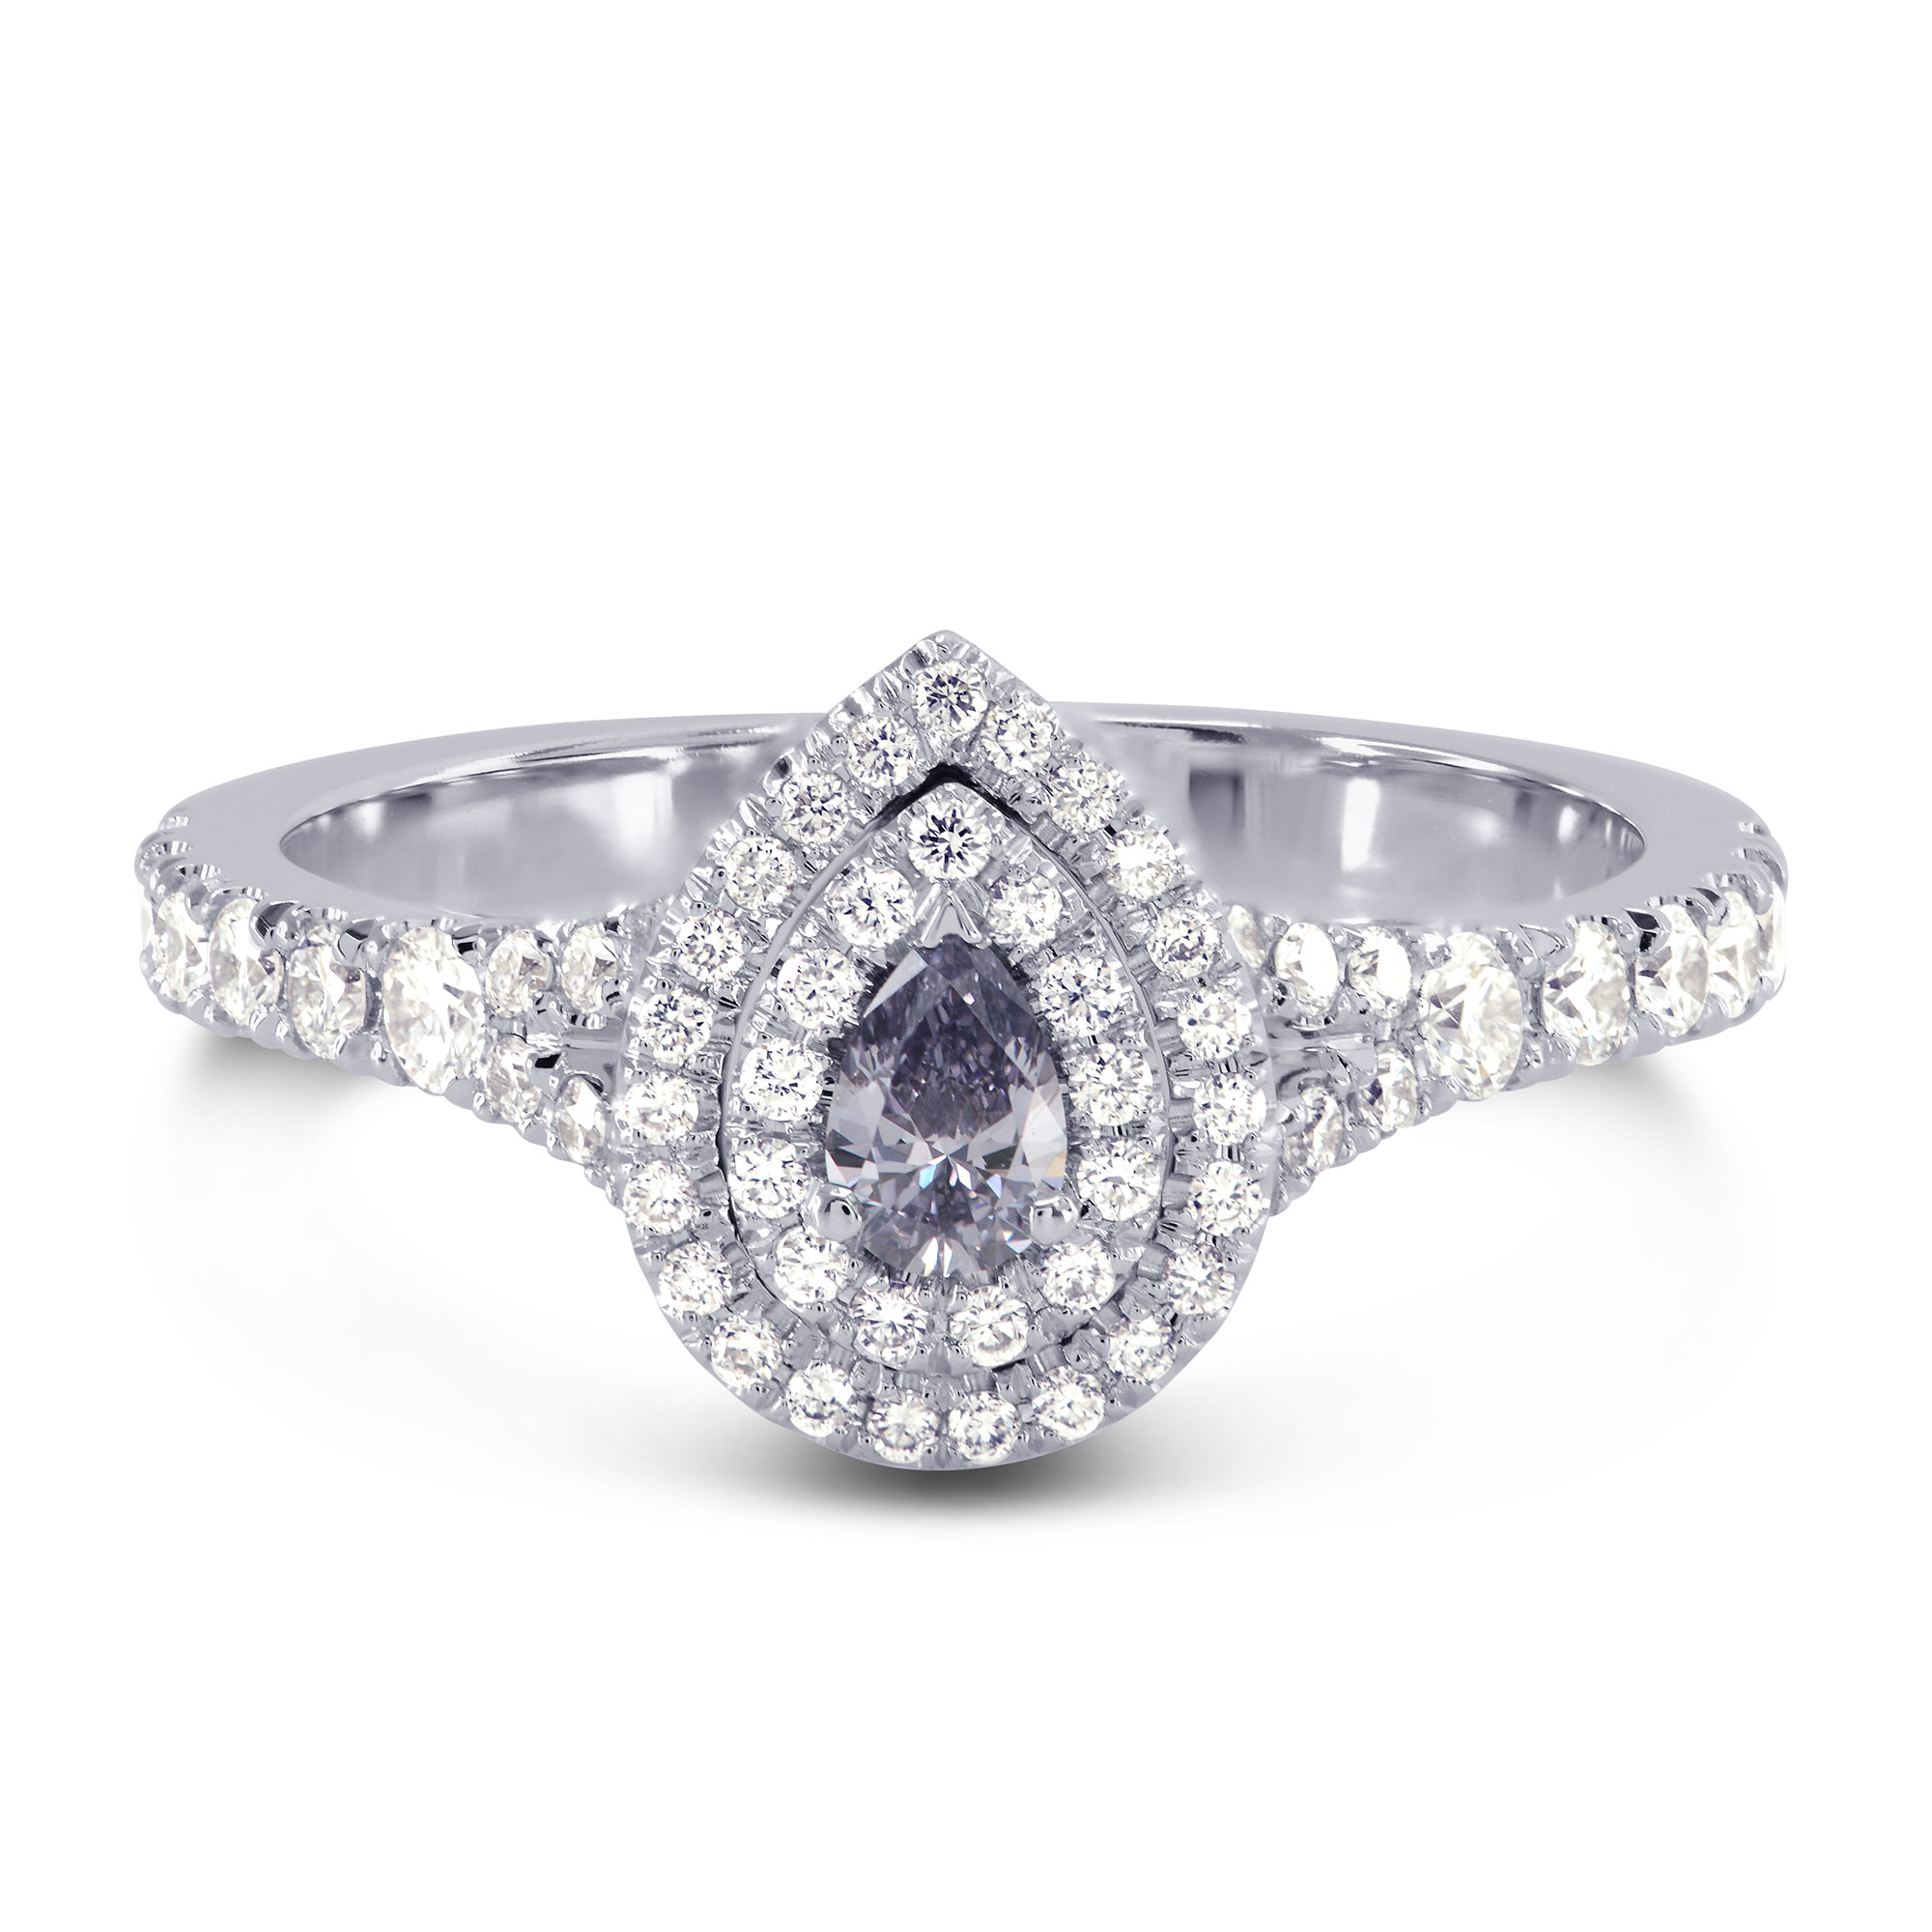 Fancy Violet Gray Double Halo Ring, SKU 149673 (0.55Ct TW)